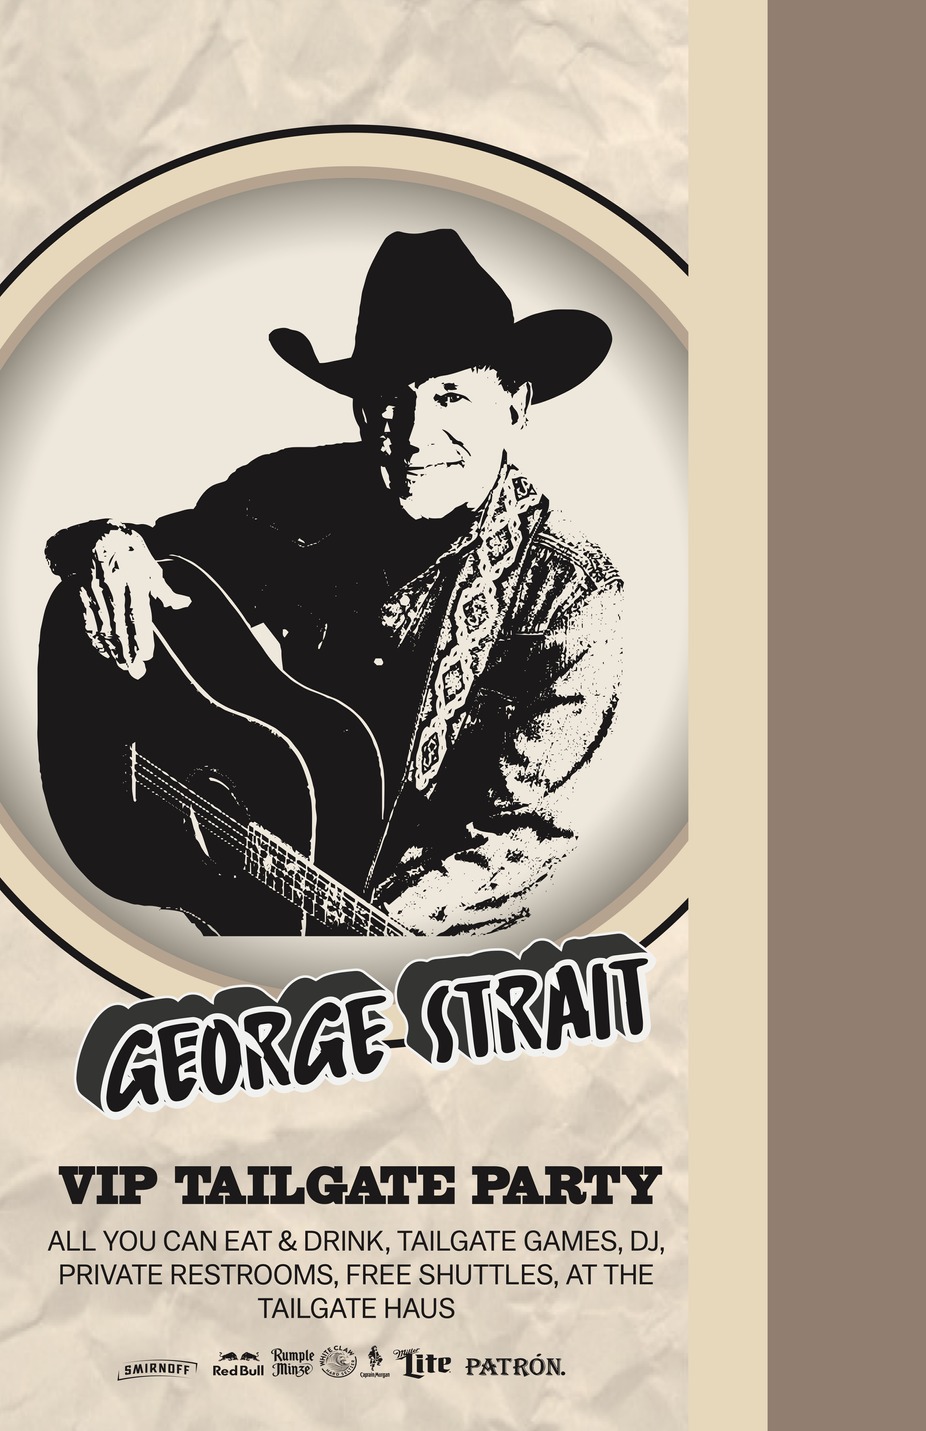 George Strait VIP Tailgate Party event photo